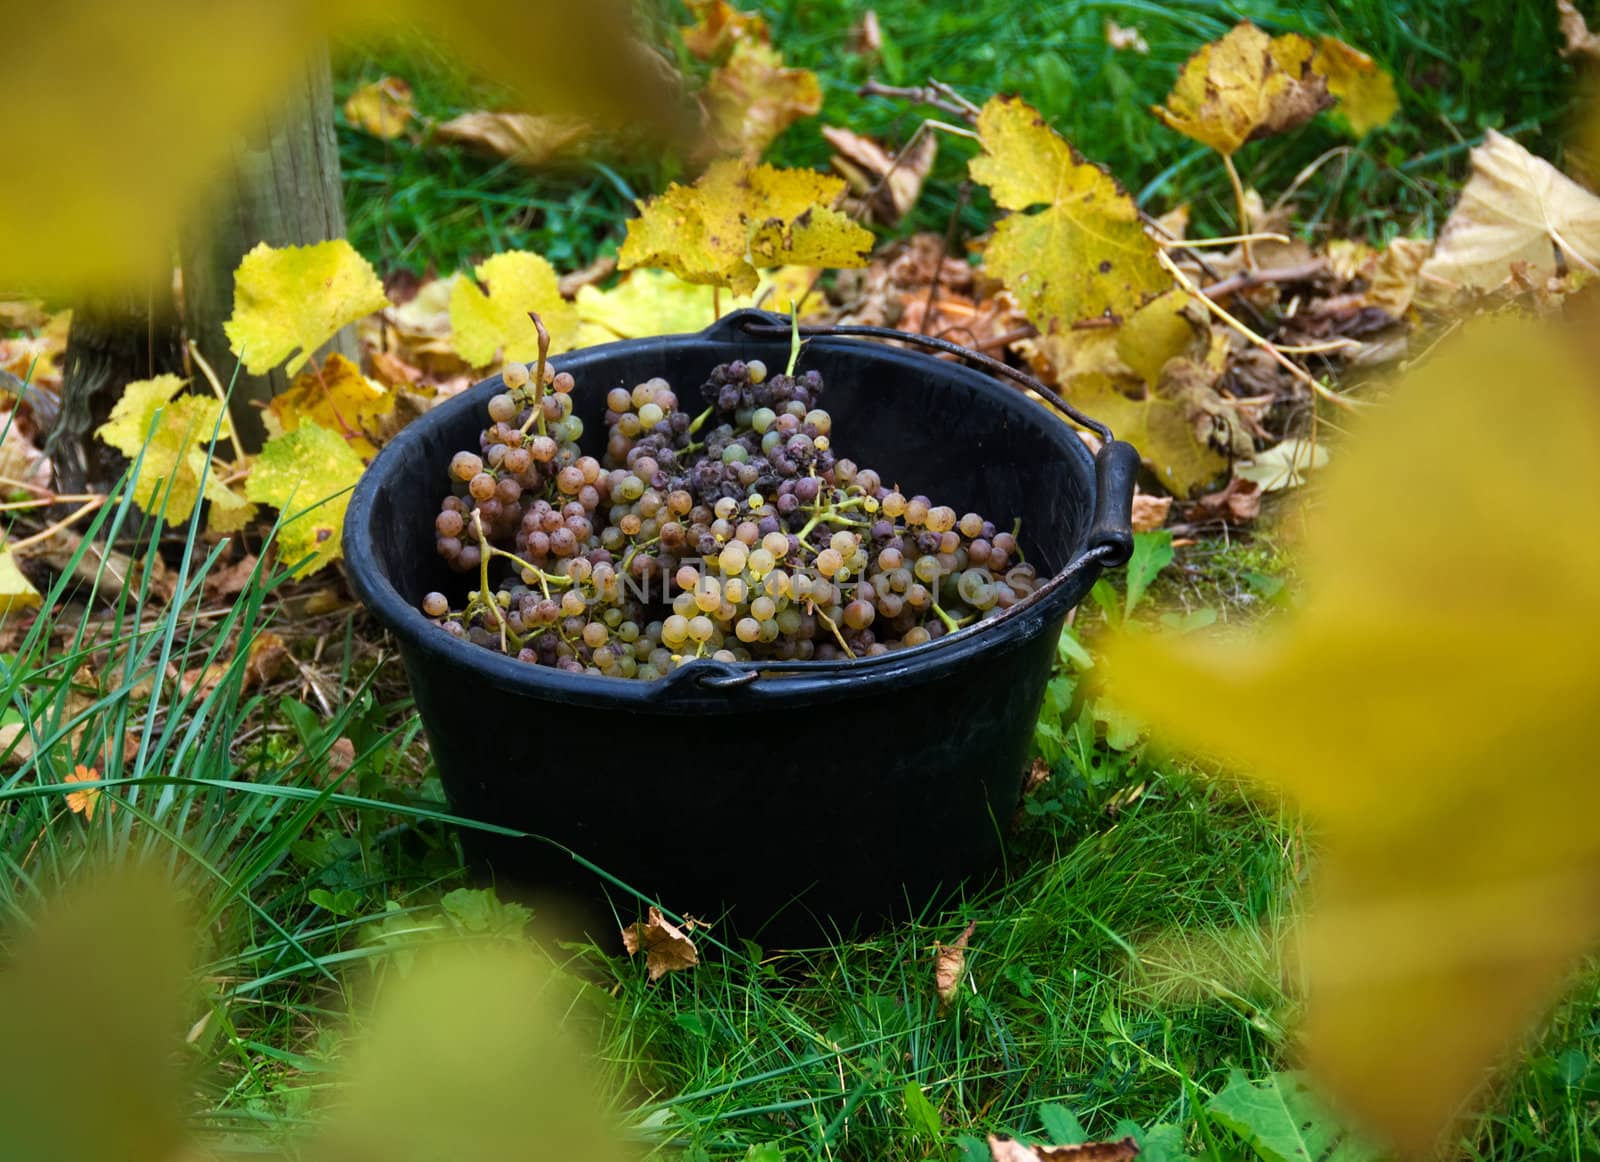 A pail is laden with Gros and Petit Manseng grapes ready to make Jurnacon wine in Southwest France.